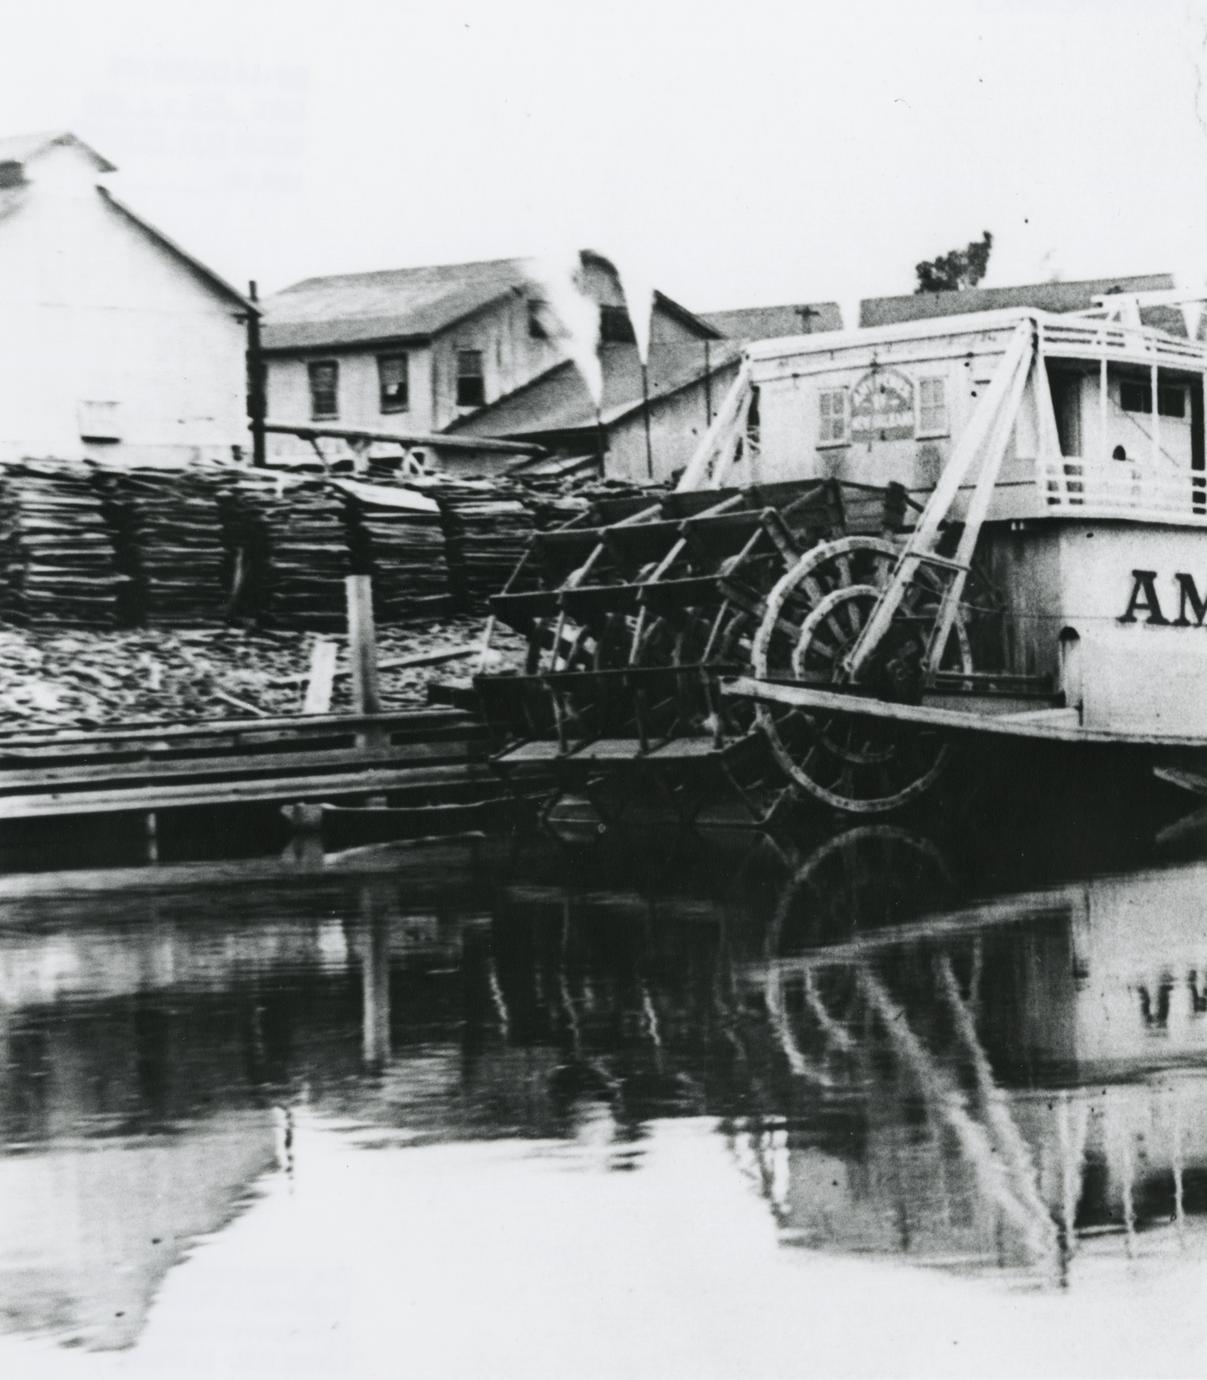 Amy Hewes (Towboat, 1903-1949)